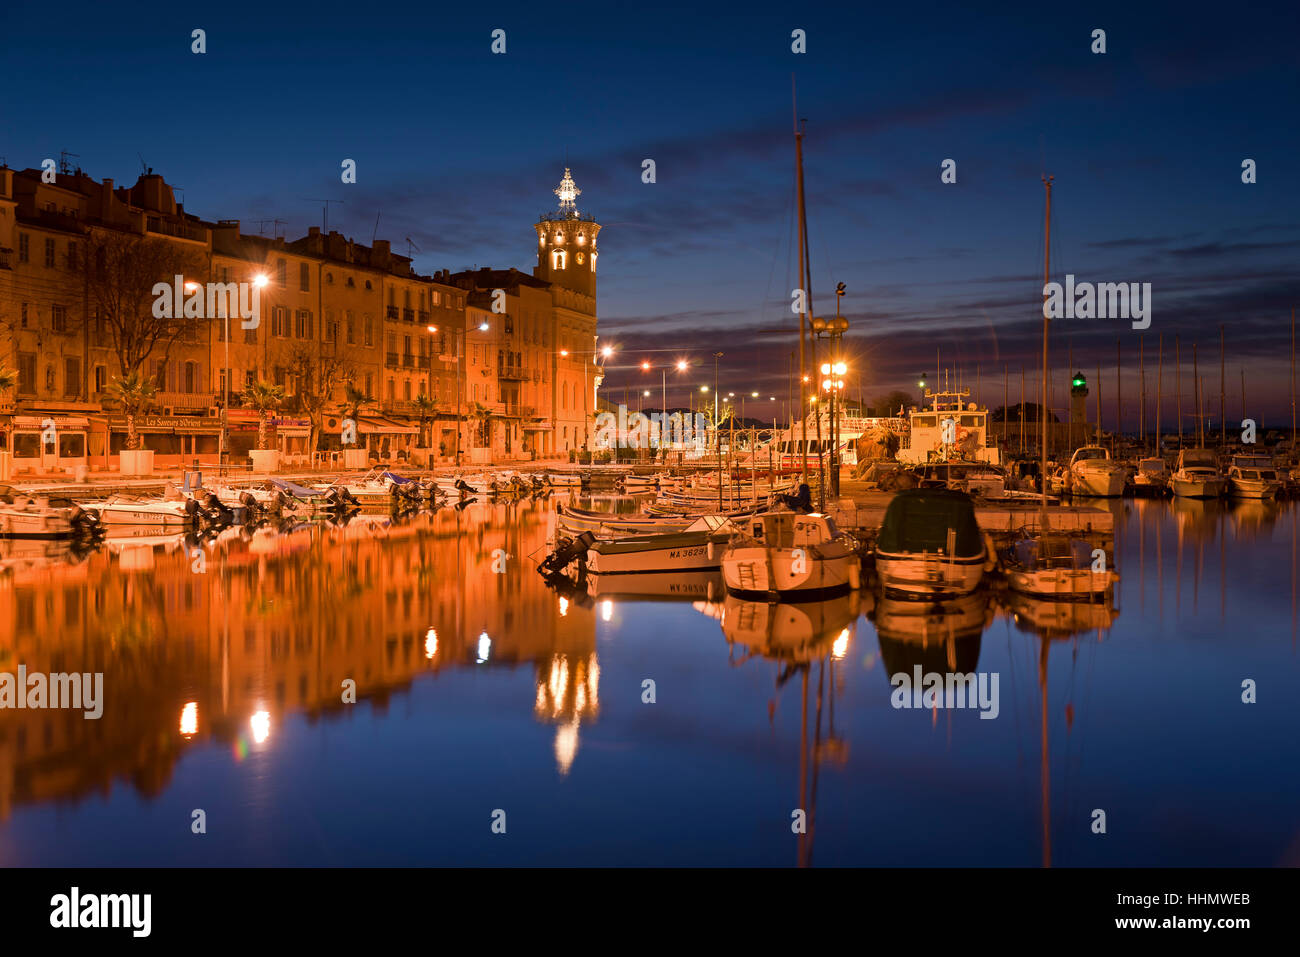 Old city with boats in the harbour at night, La Ciotat, Provence-Alpes ...